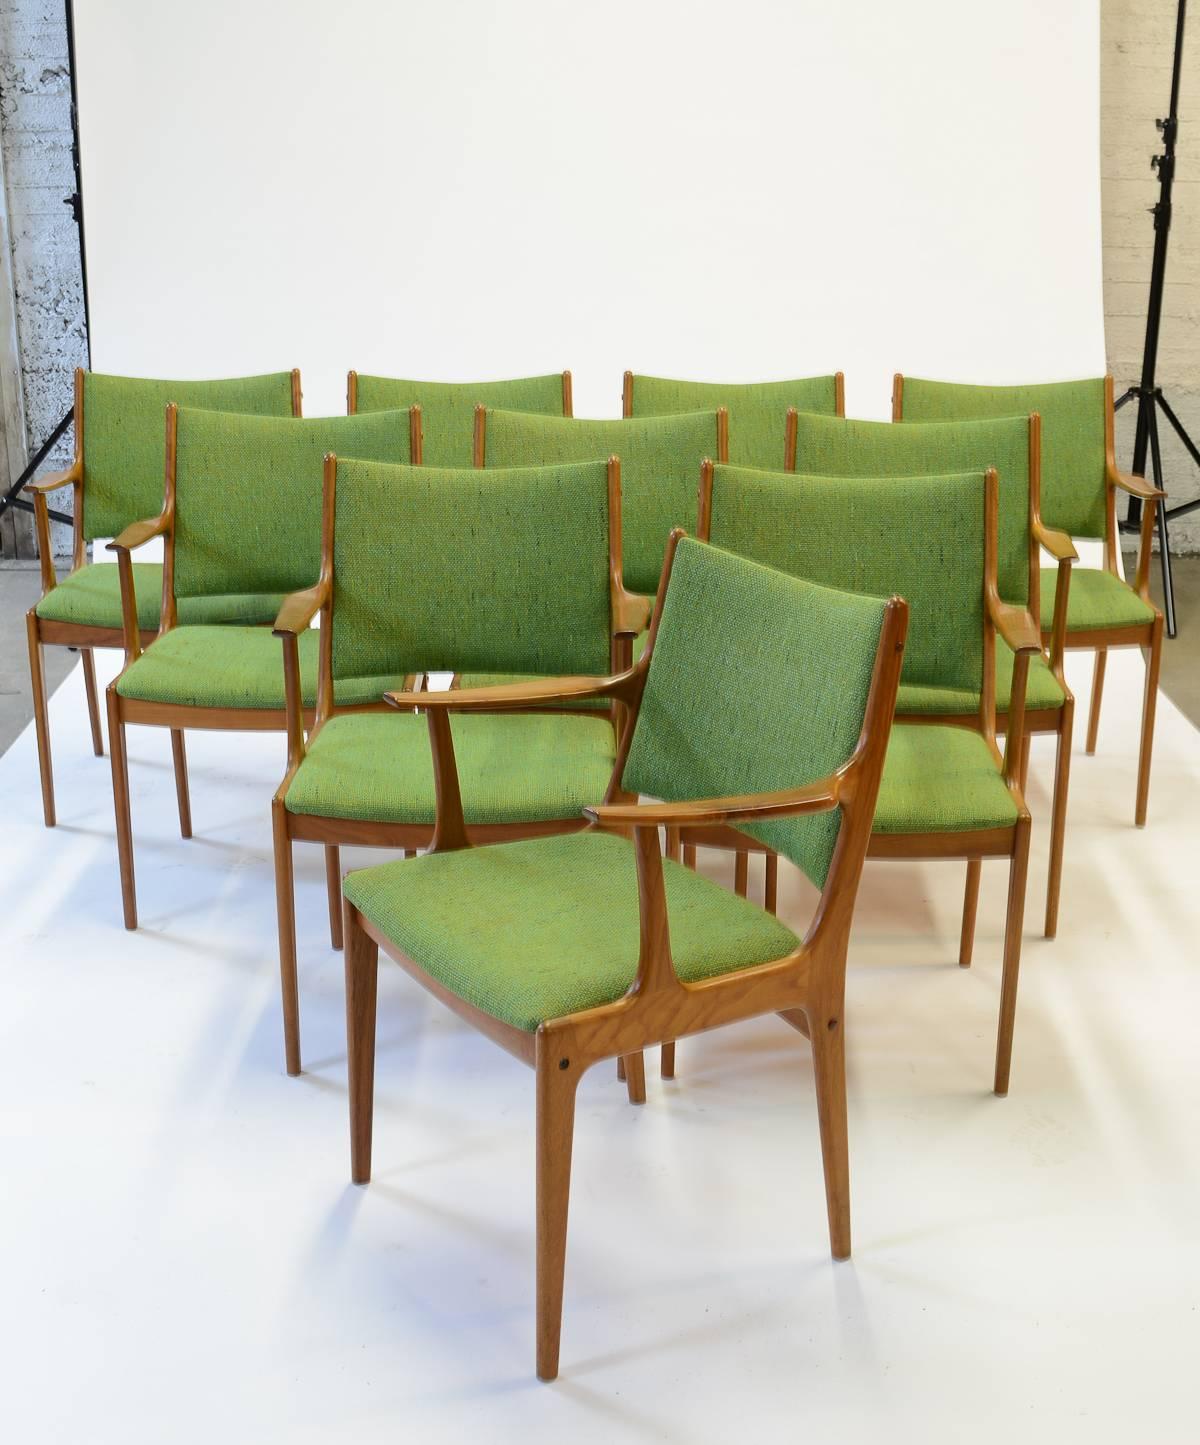 An Impressive set of Johannes Andersen armchairs for Uldum Modelfabrik with green fabric by Nanna Ditzel Hallingdal. The full set of ten armchairs are crafted in teak.

It is believed that Andersen initially apprenticed as a cabinetmaker. He went